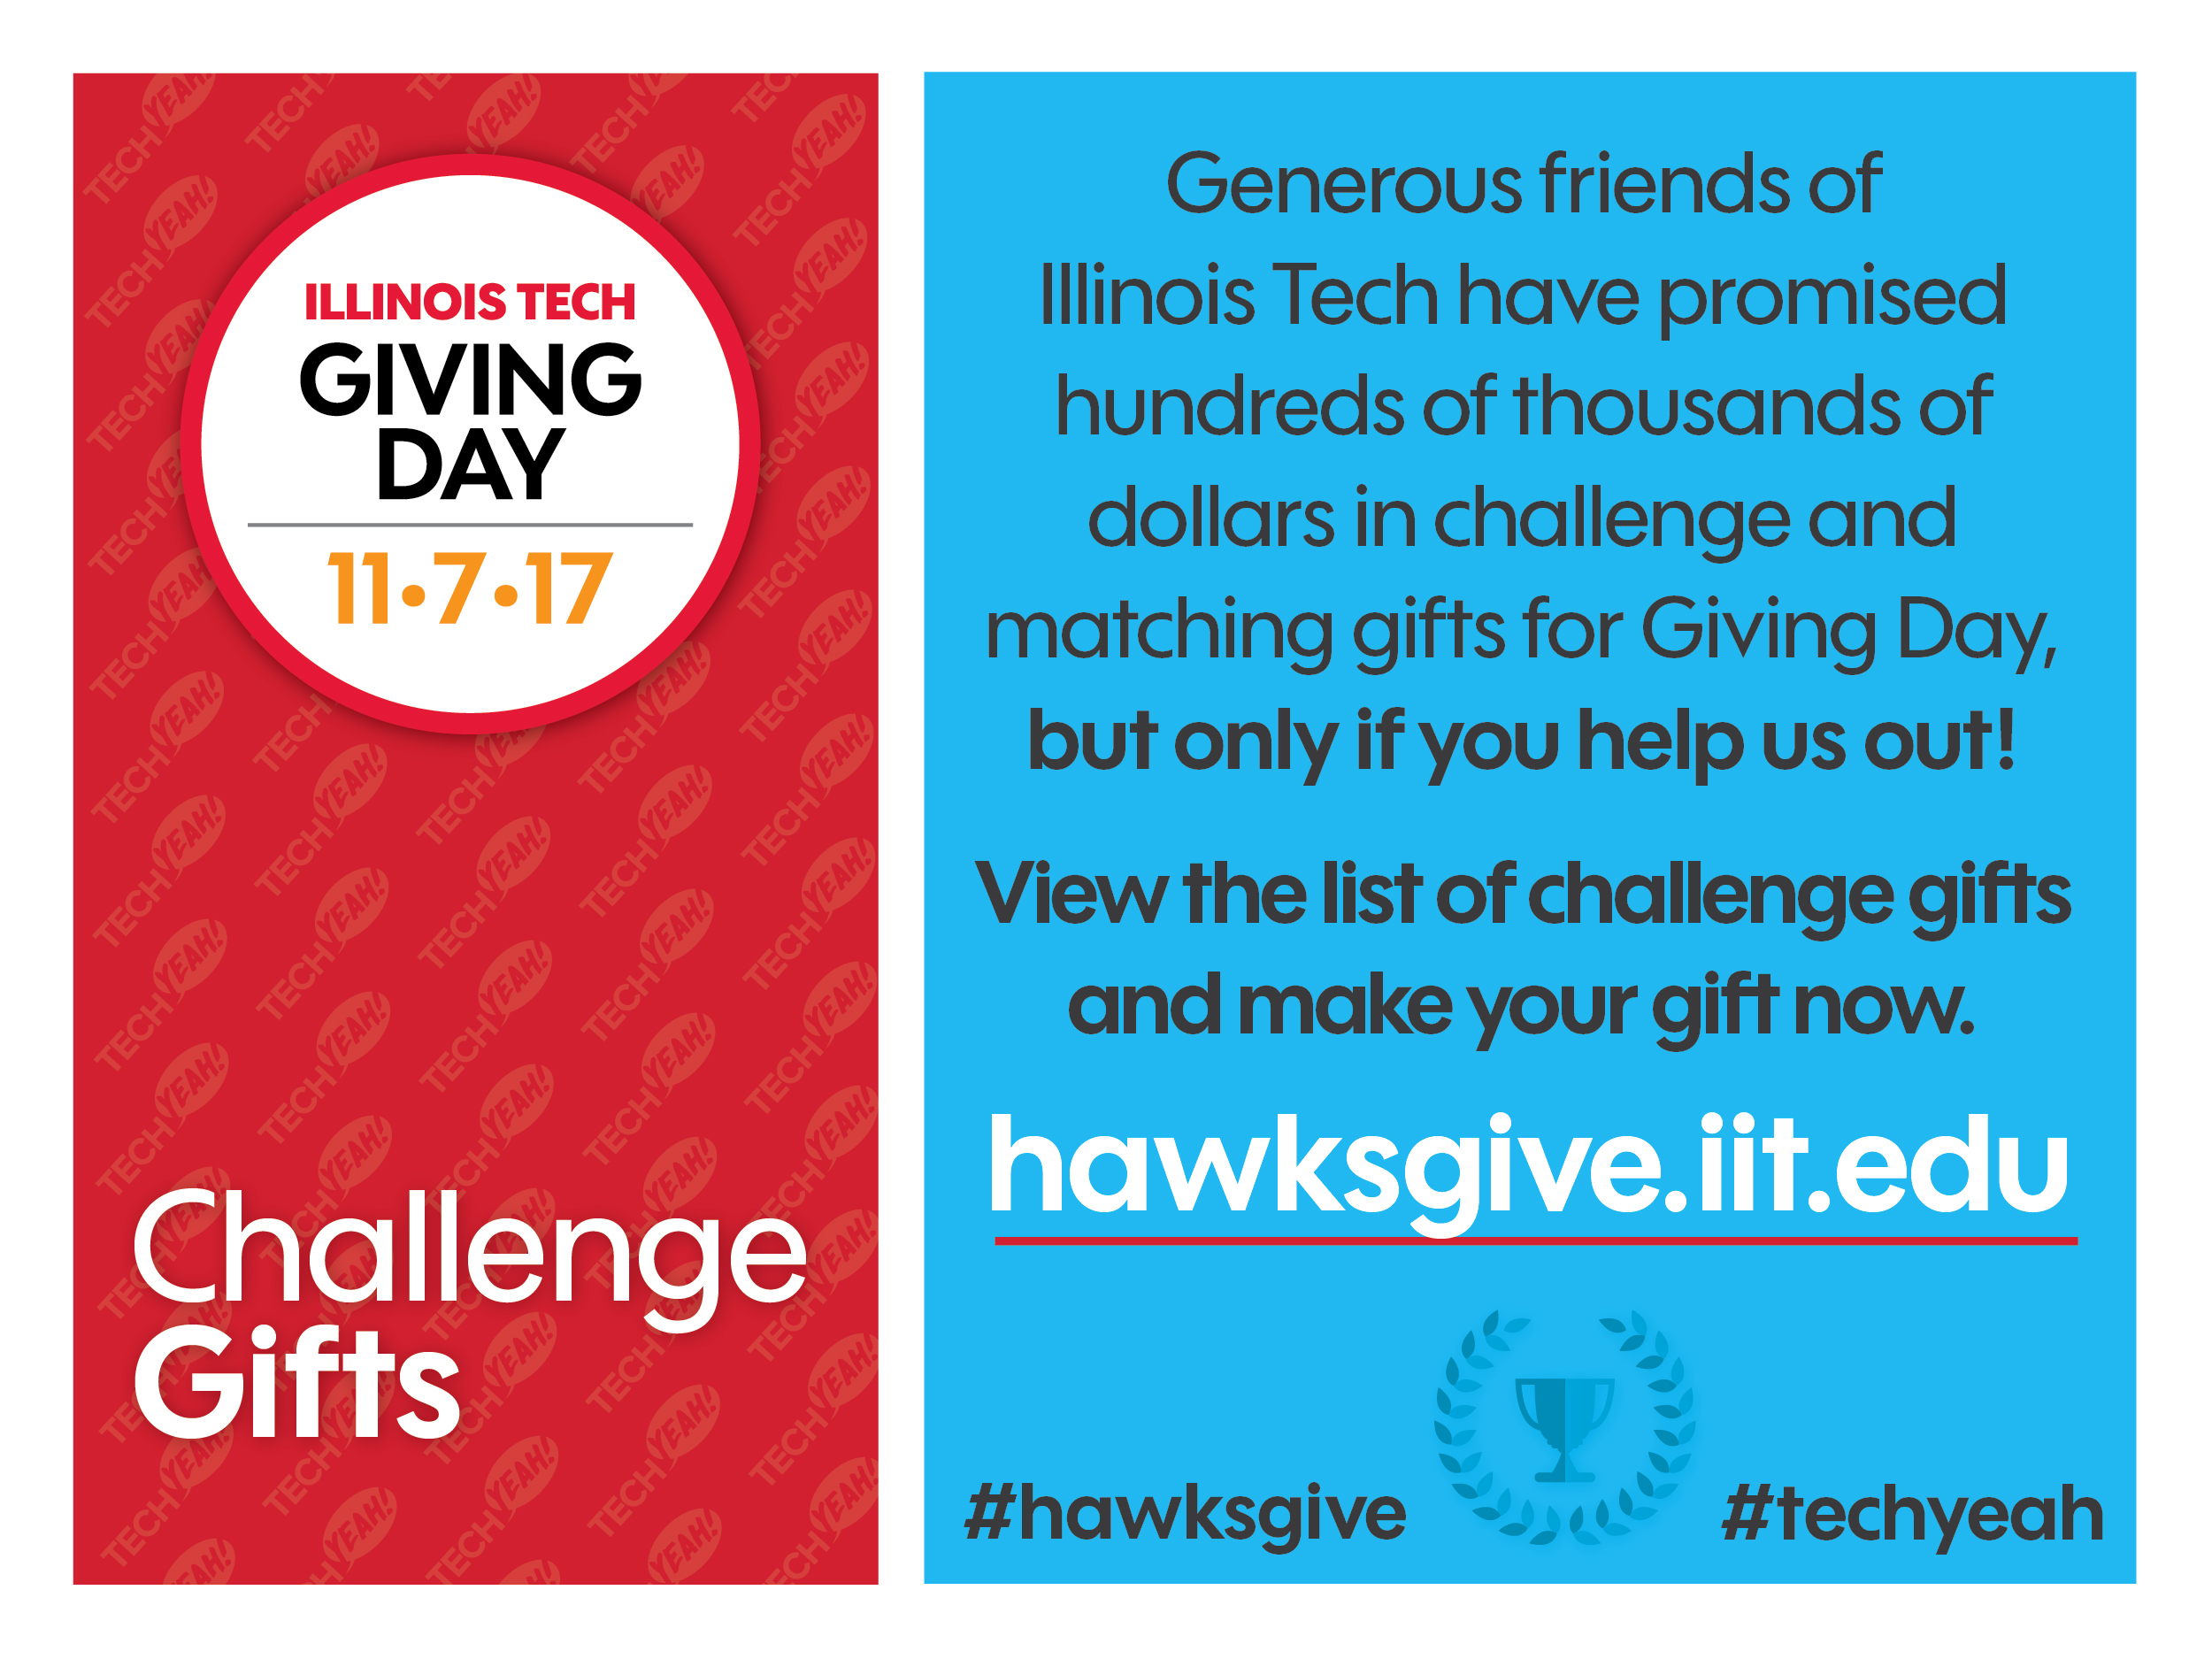 Image of a Facebook social graphic highlighting challenge gifts for Illinois Tech's third Giving Day Campaign in 2017.